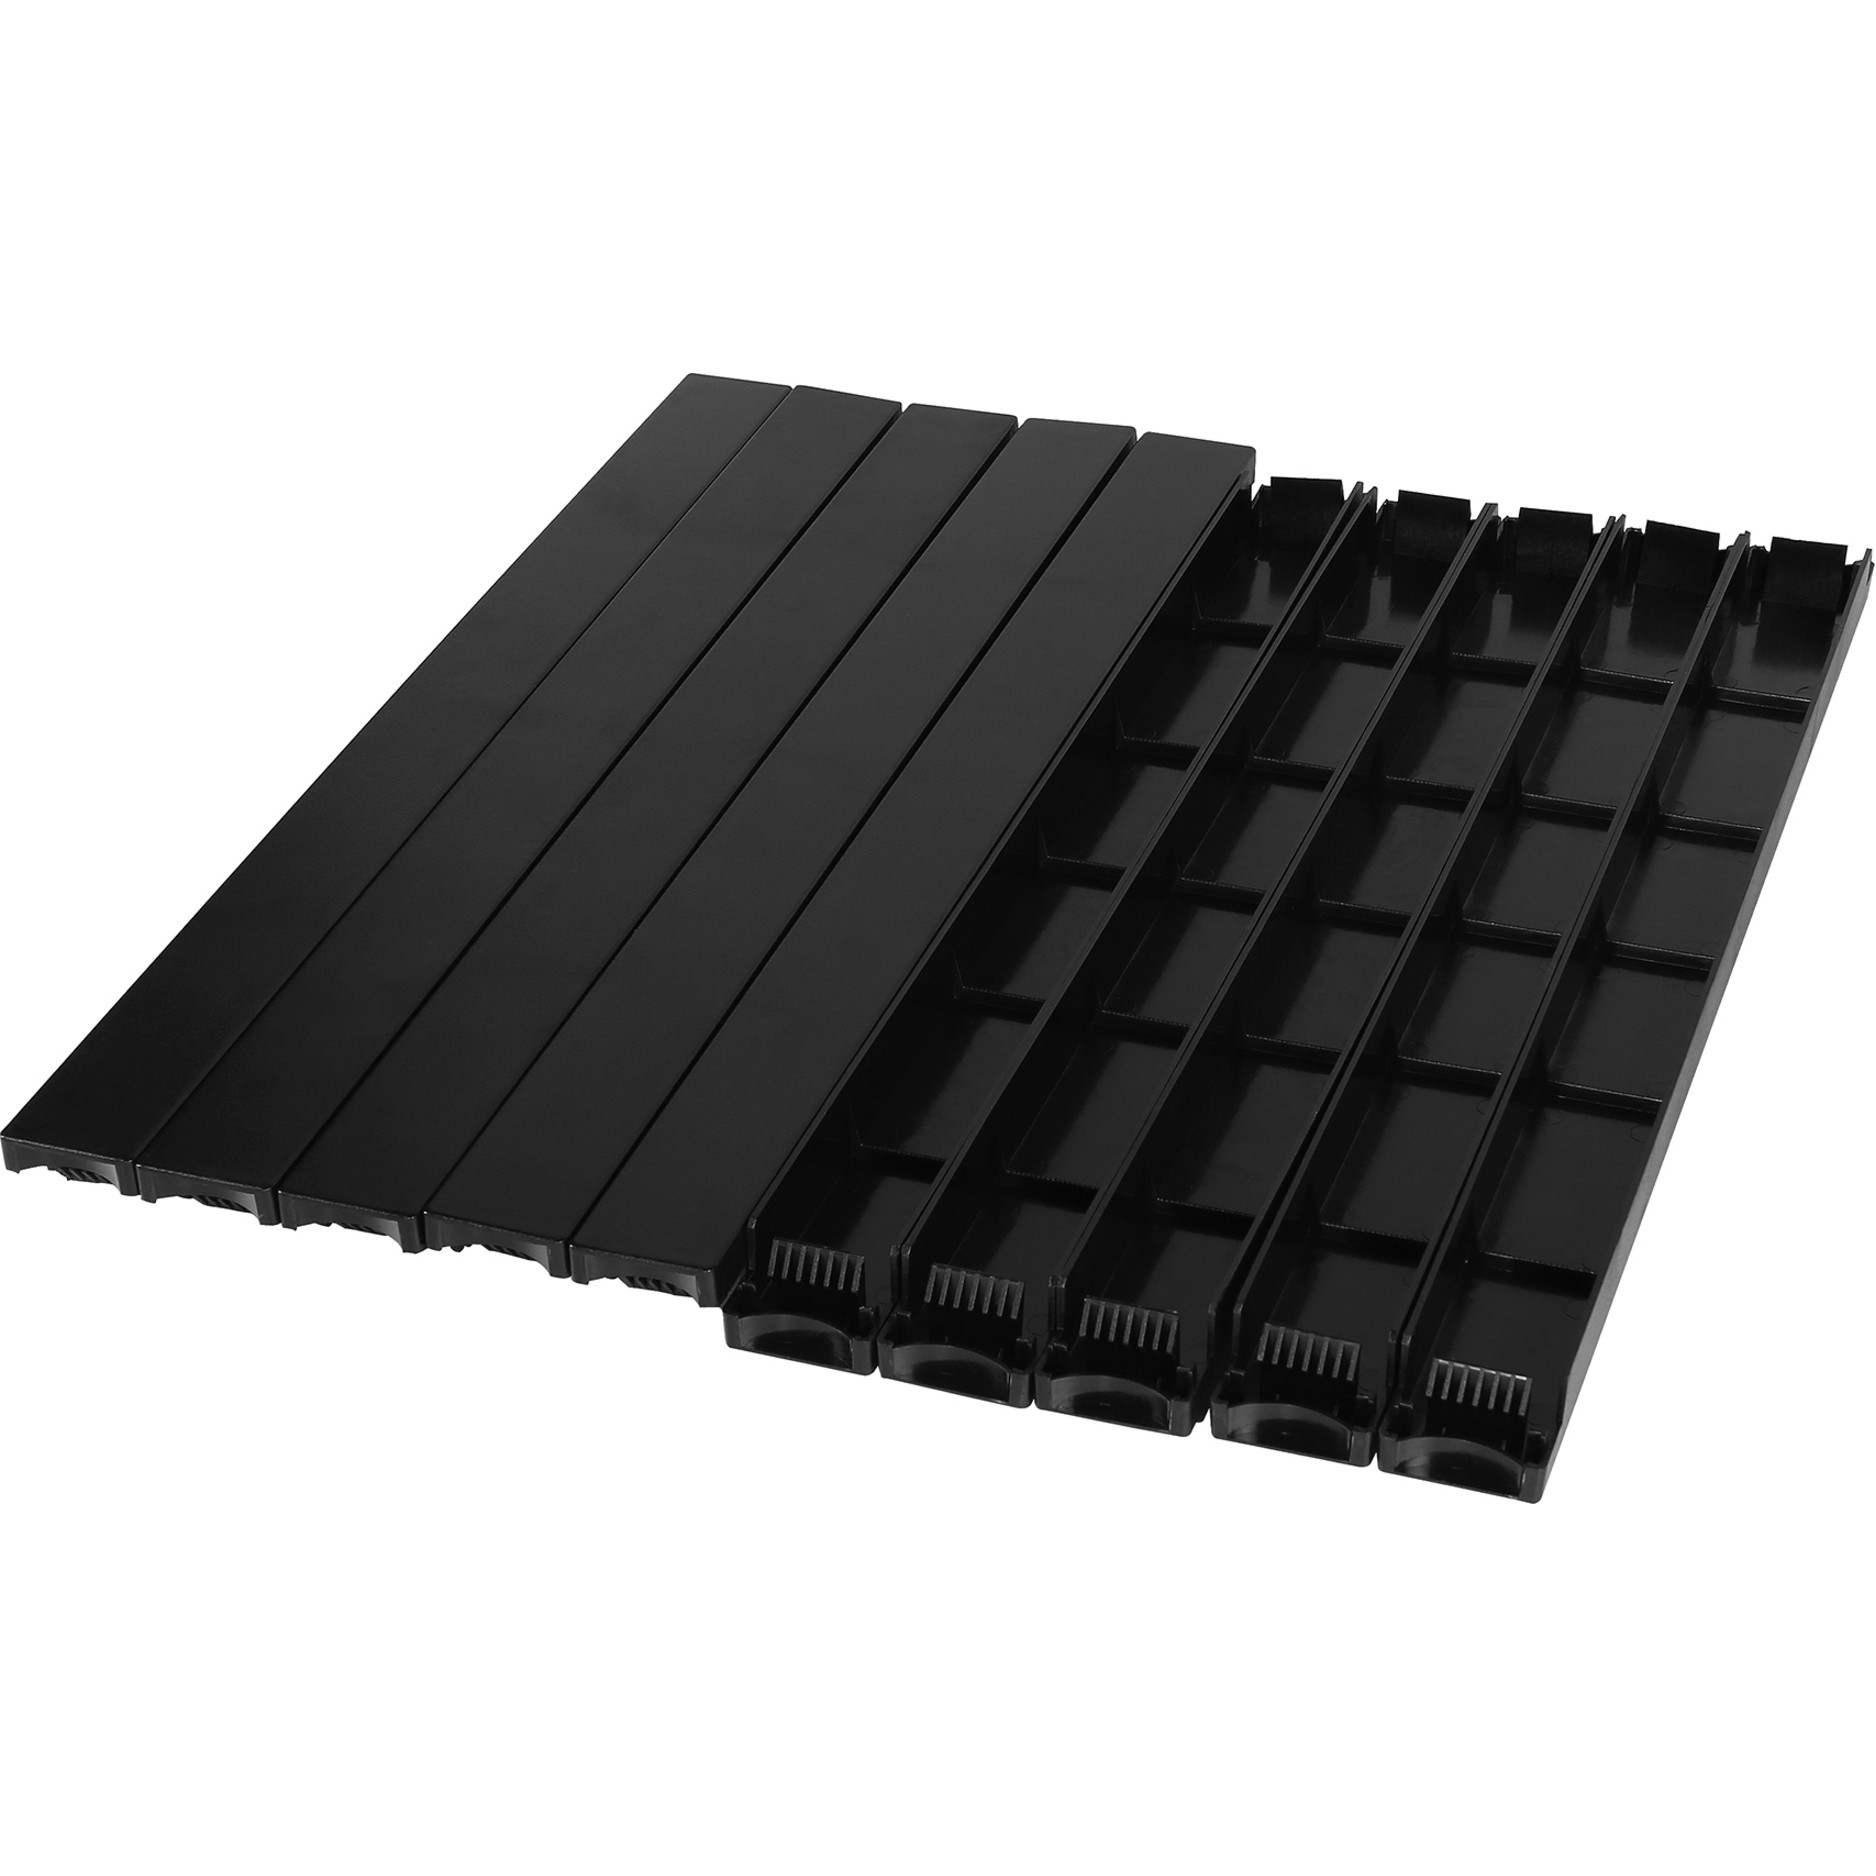 Cyber Power CRA20001 Blanking panels Rack Accessories19″ 1U airflow management blanking panels, tooless installation, 10pcs per pack, … CRA20001